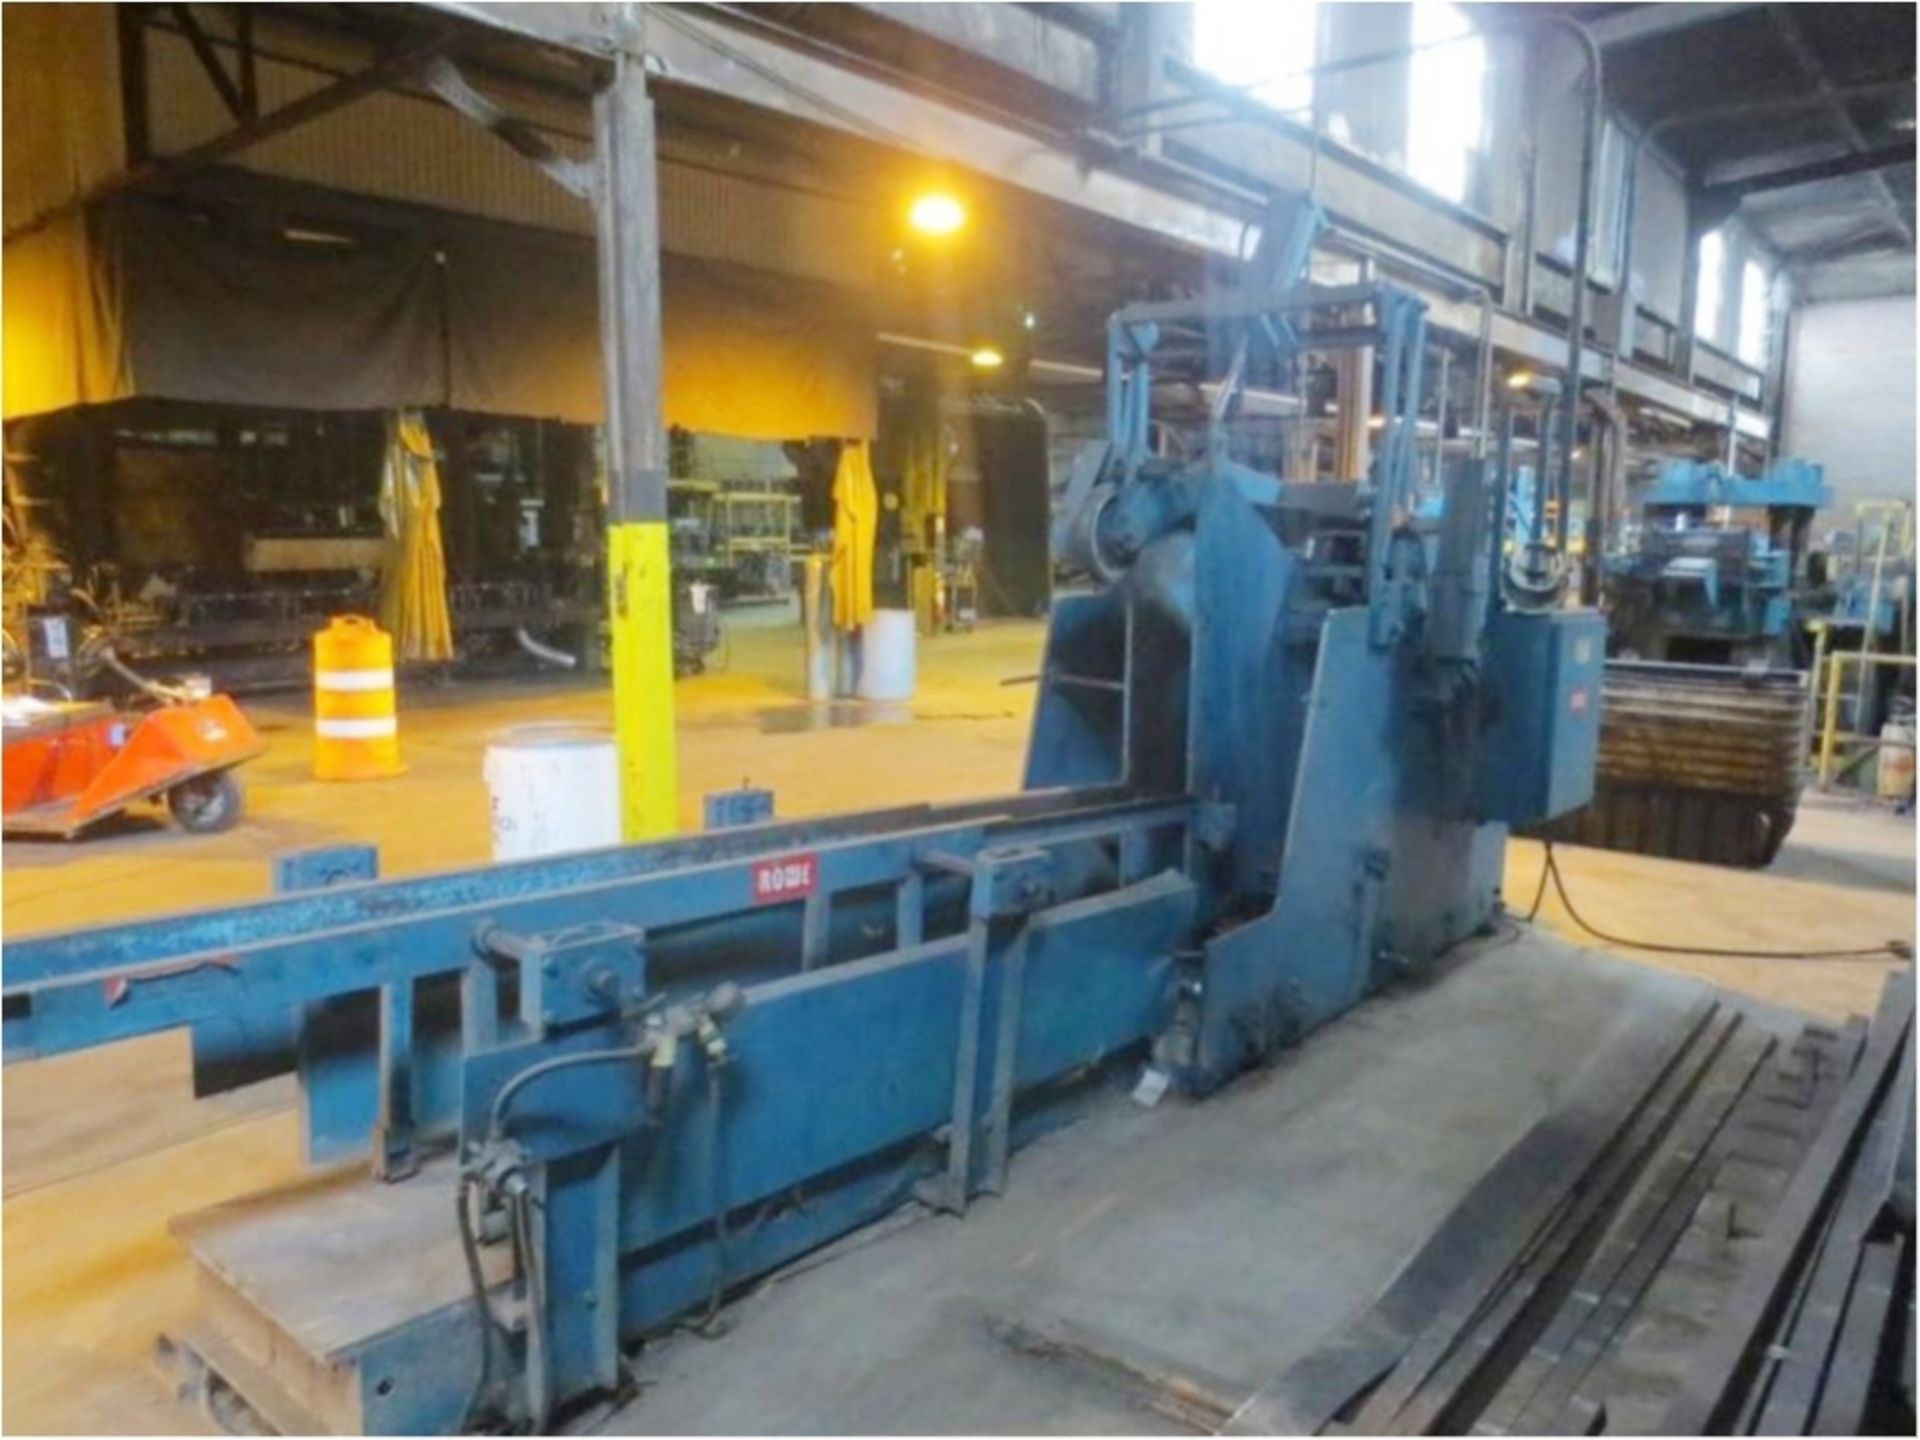 12,000 lbs. x 20" x 0.250" Rowe Coil Cradle & Straightener, Mdl: C8-20/12J , Located In: